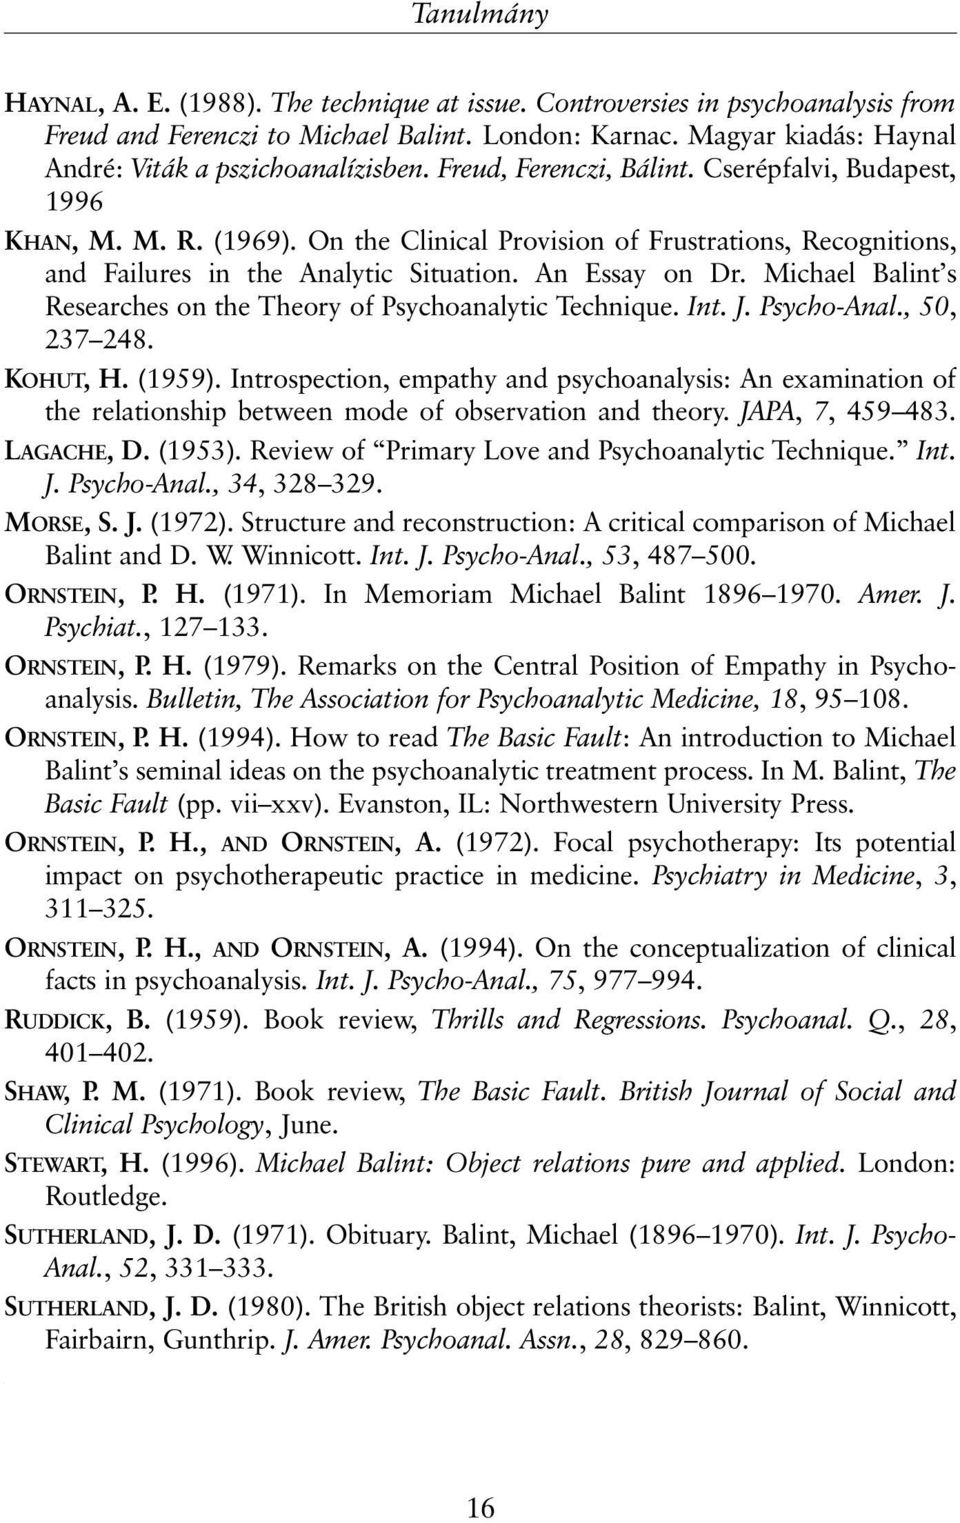 On the Clinical Provision of Frustrations, Recognitions, and Failures in the Analytic Situation. An Essay on Dr. Michael Balint s Researches on the Theory of Psychoanalytic Technique. Int. J.